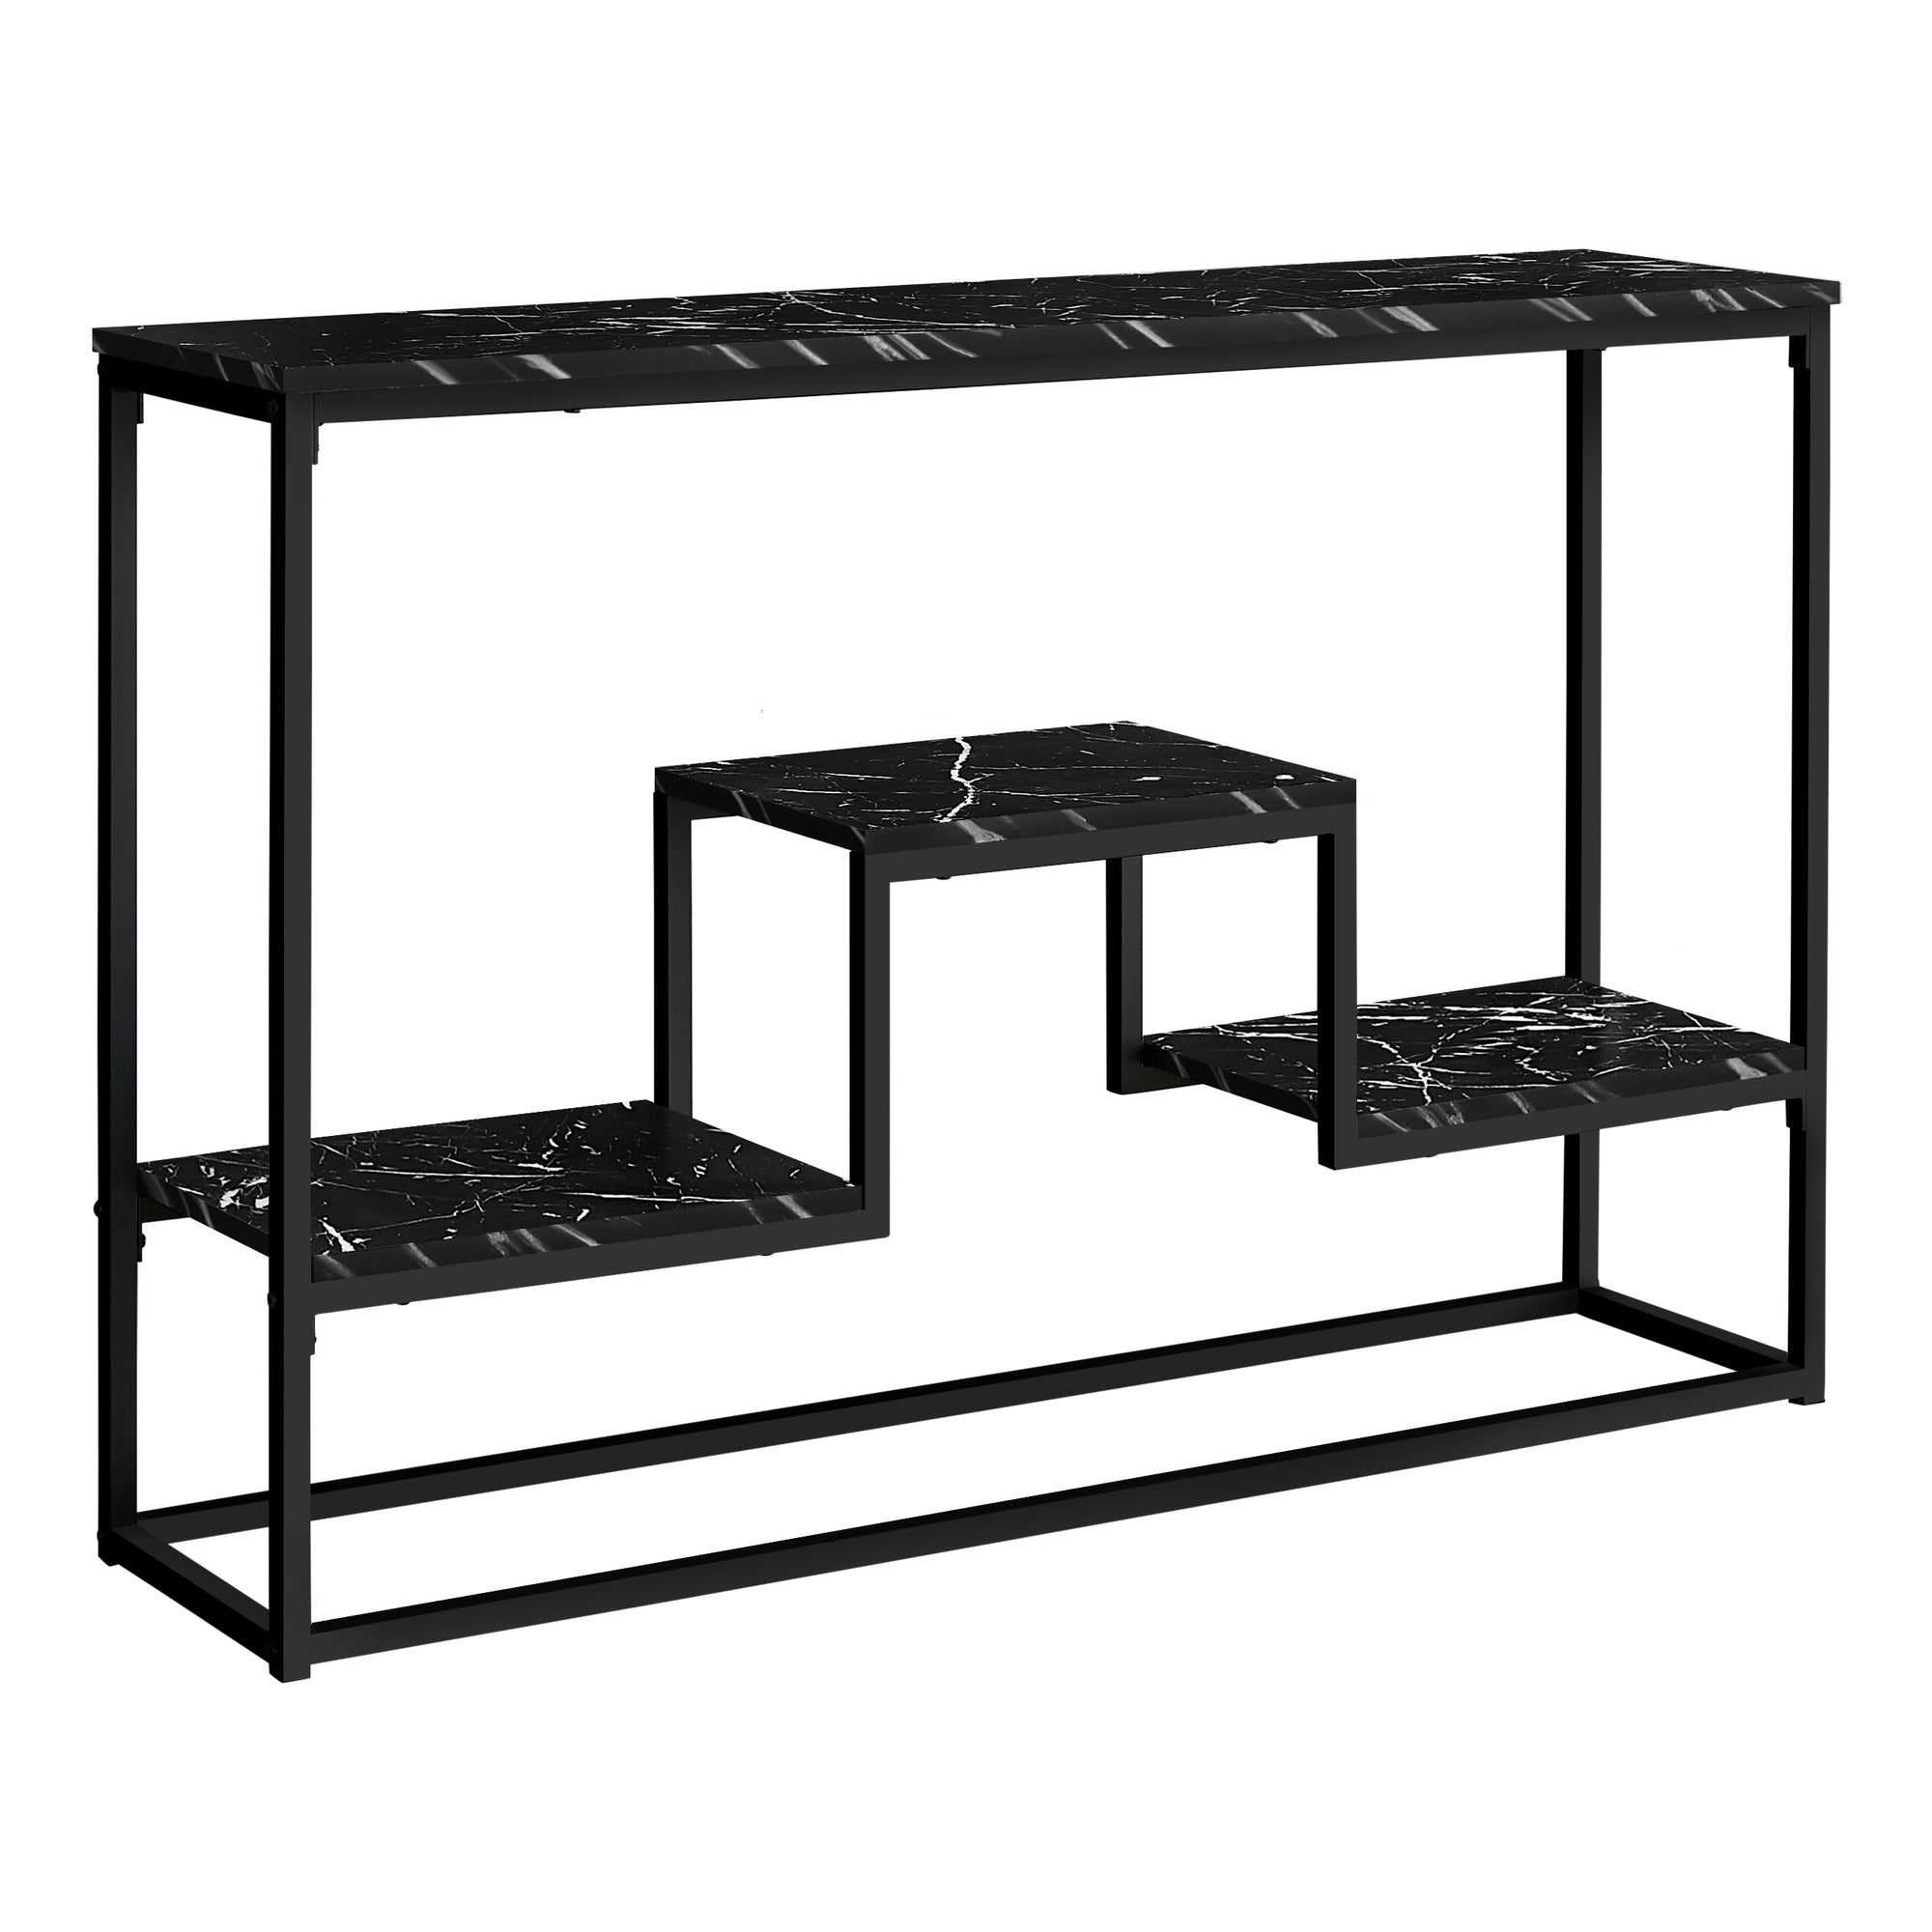 MN-423579    Accent Table, Console, Entryway, Narrow, Sofa, Living Room, Bedroom, Metal Frame, Laminate, Black Marble-Look, Contemporary, Glam, Modern